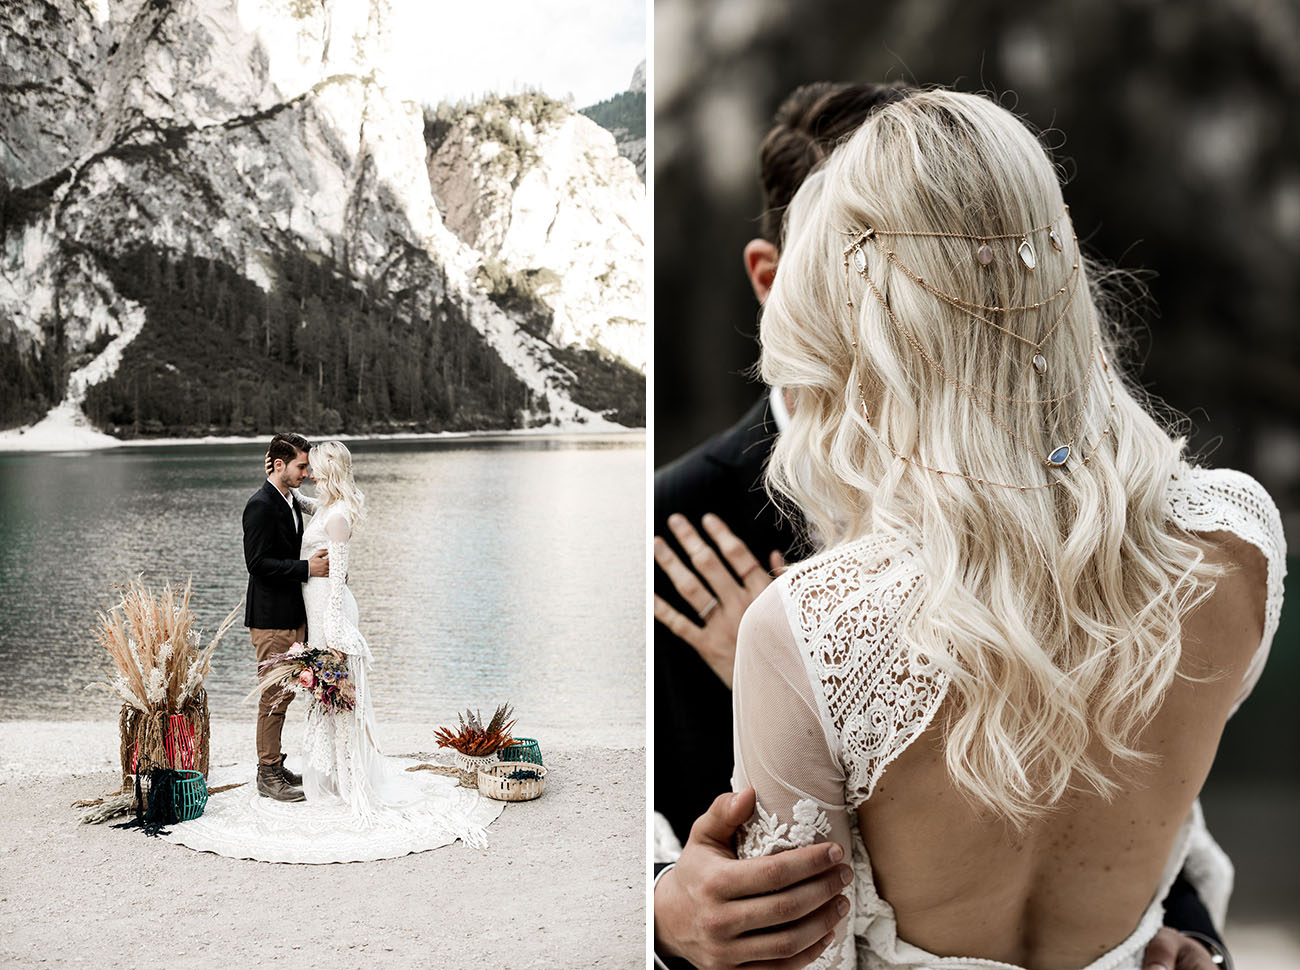 Look at the gorgeous stone headpiece and the open back of the dress